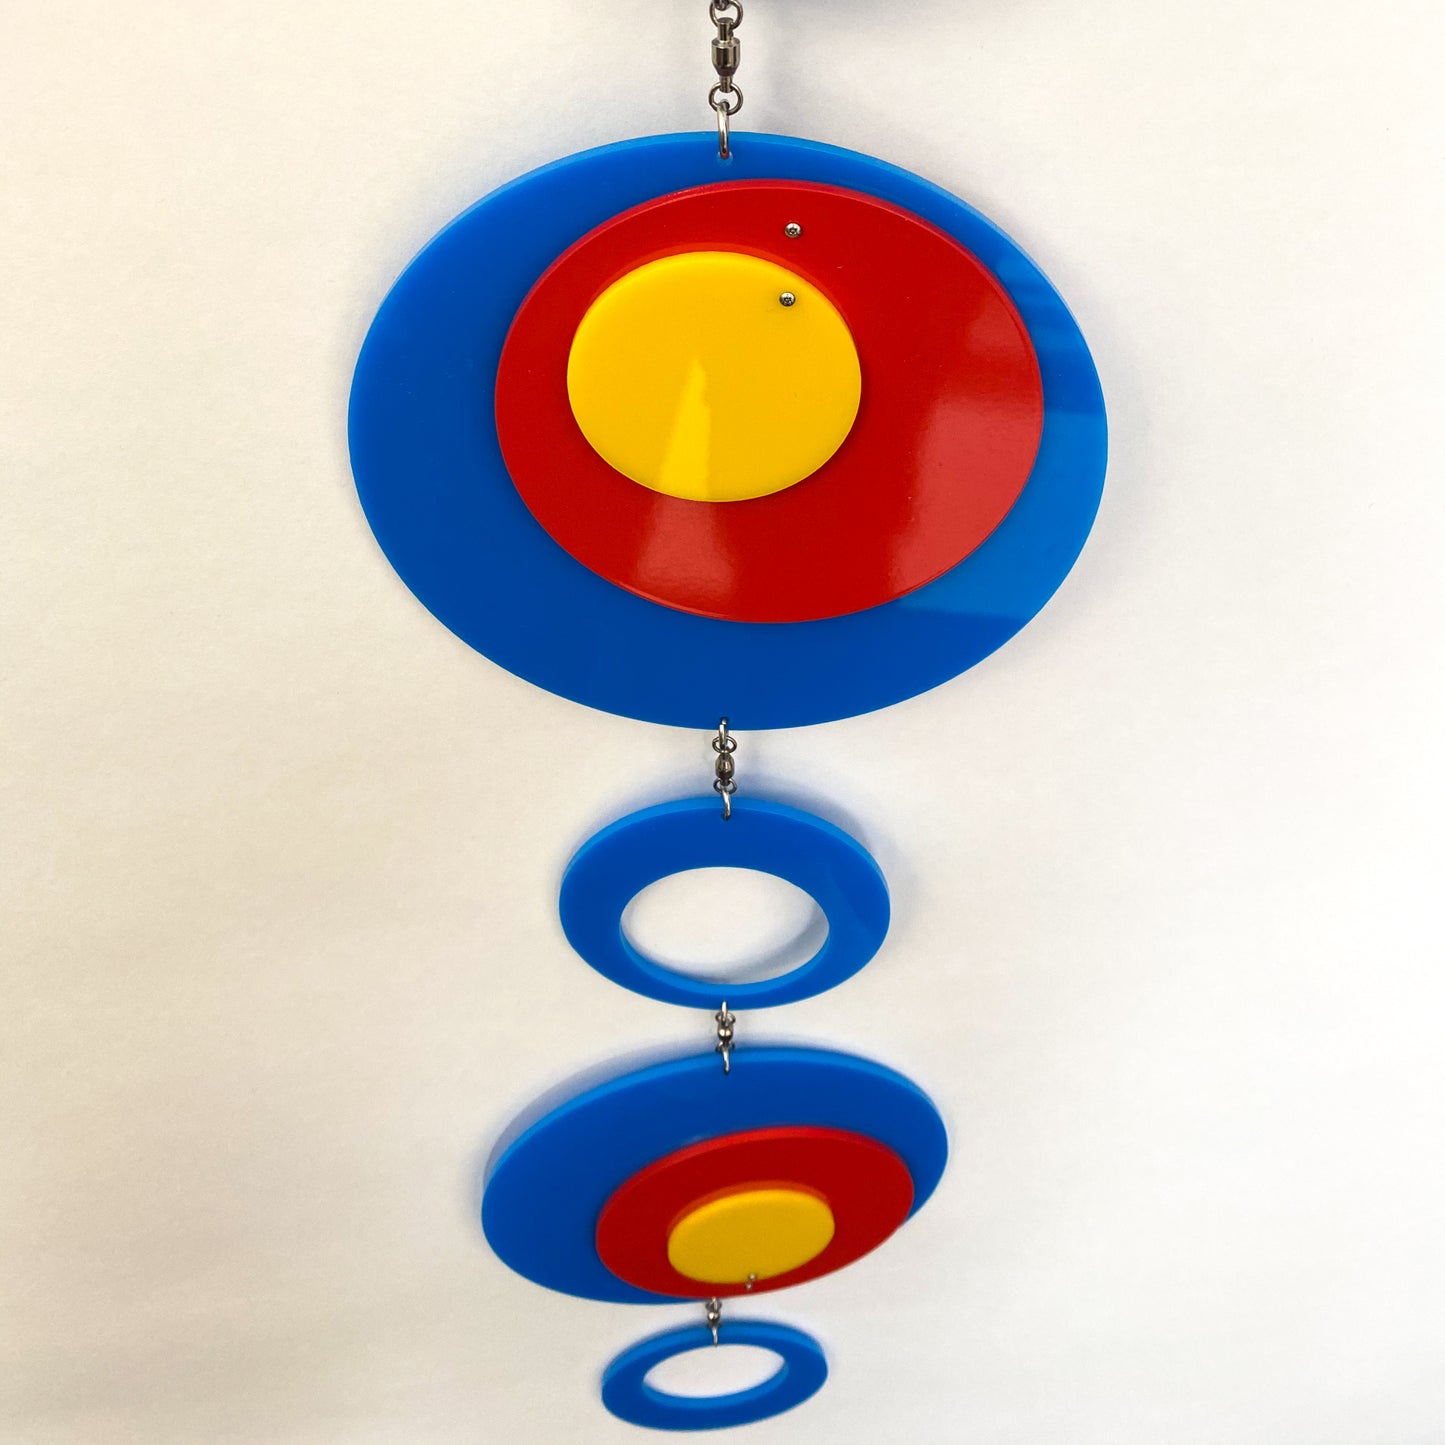 Another view of Groovy Twirly Blue Multi Color Vertical Kinetic Mobile in Blue Red and Yellow by AtomicMobiles.com